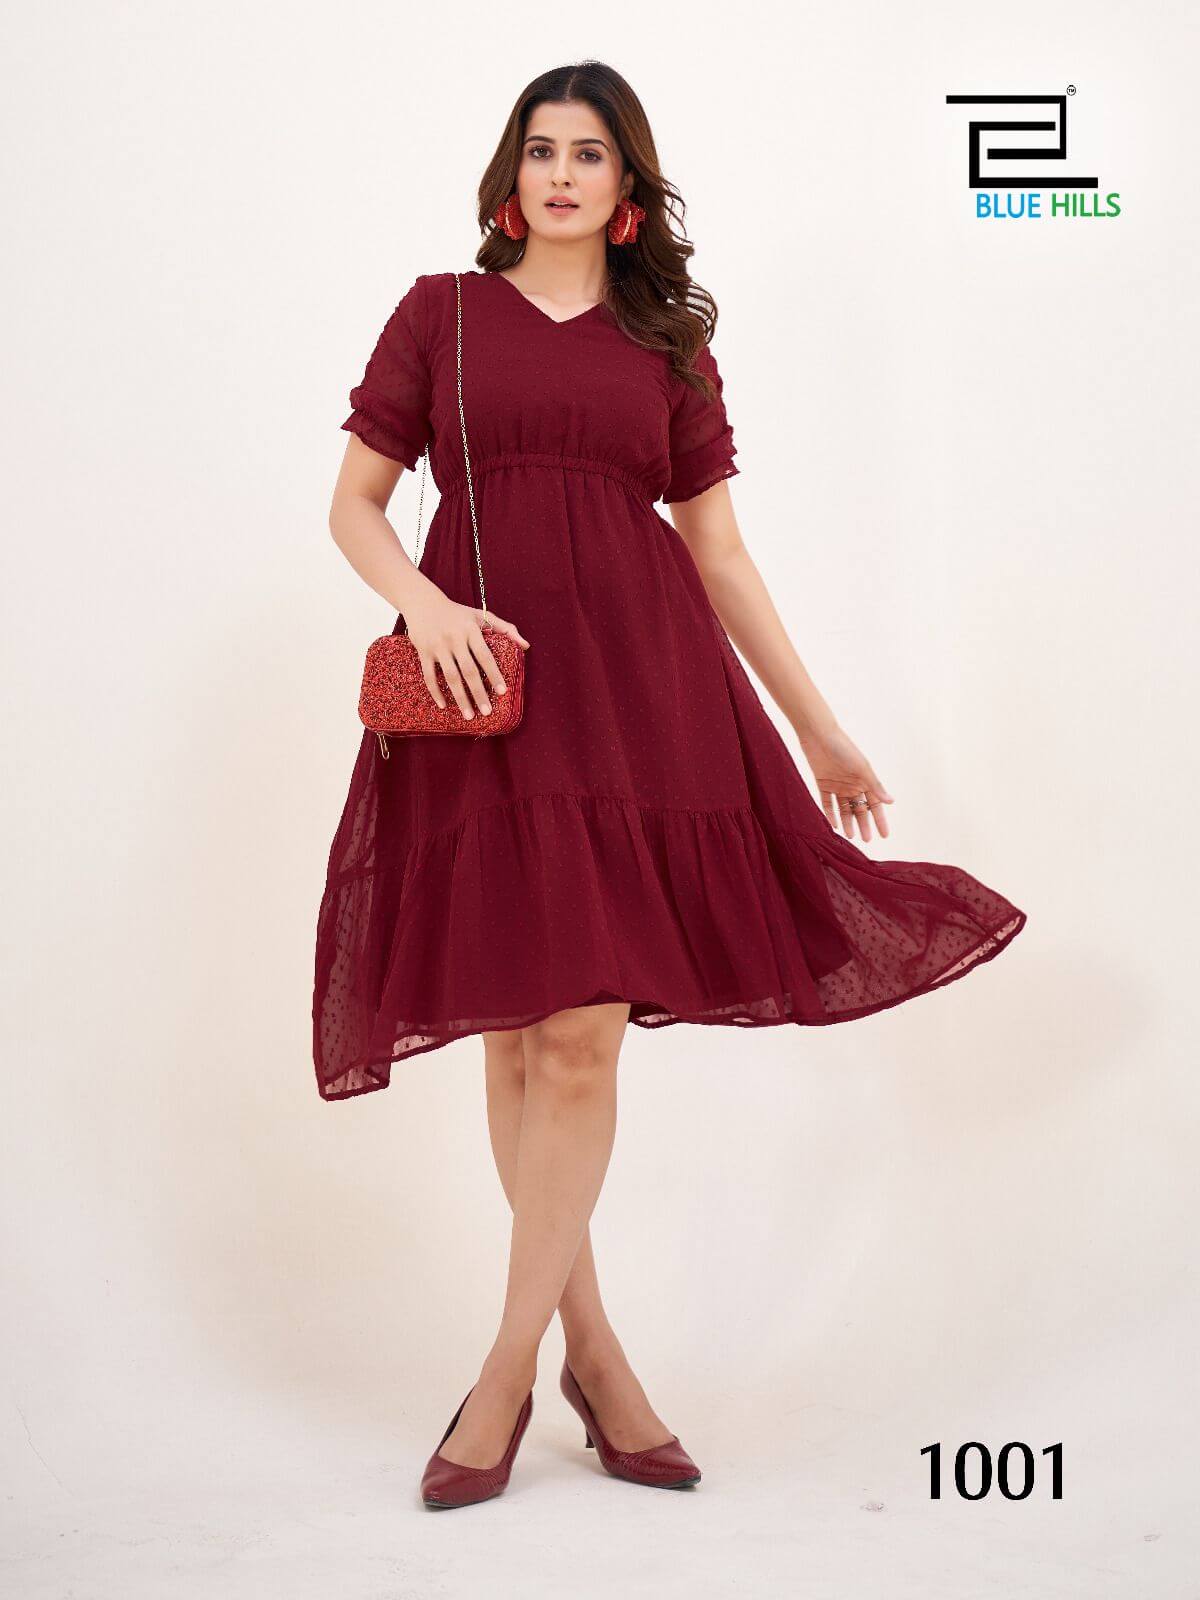 Blue Hills Charming One Piece Dress Catalog collection 1